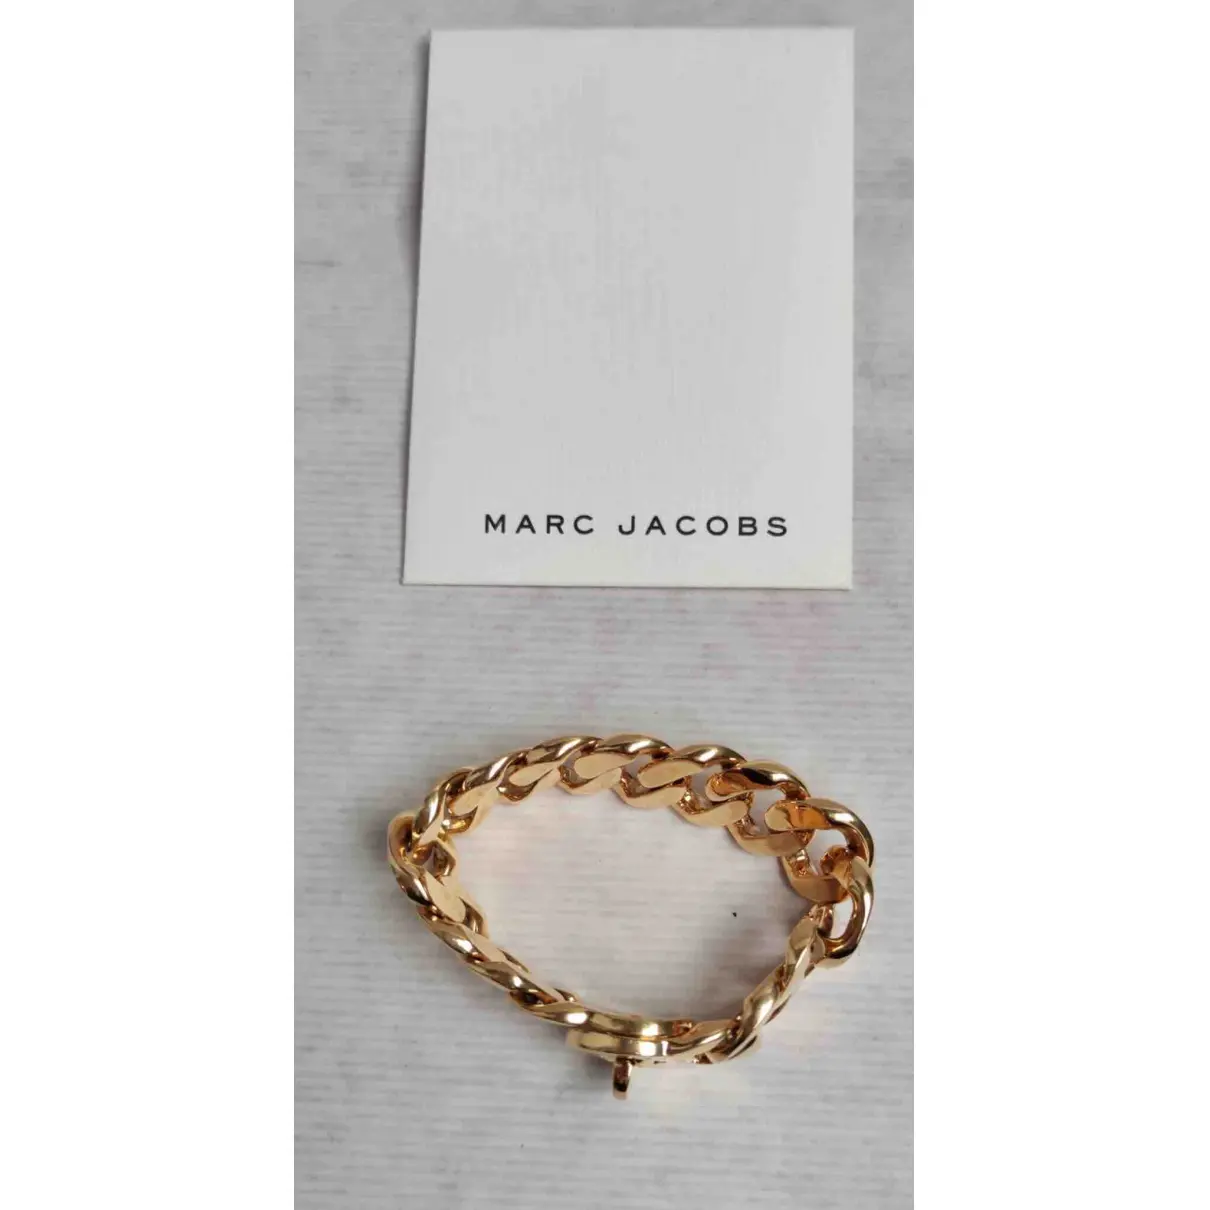 Buy Marc by Marc Jacobs Gold Chain Bracelet online